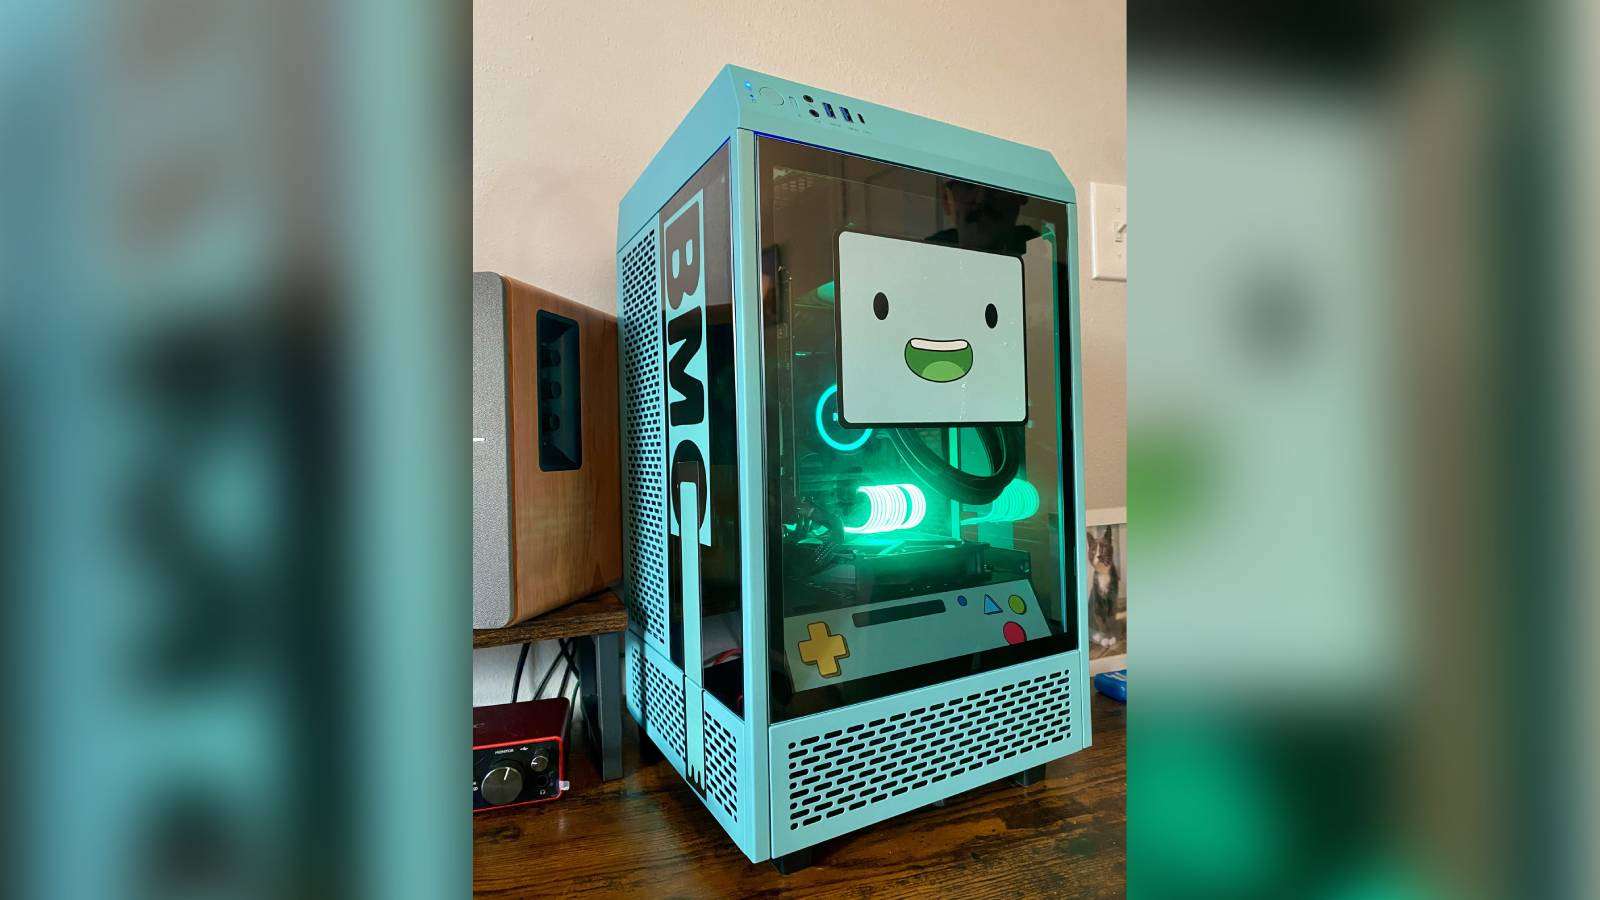 Image of the BMO PC build posted by Reddit user trombonerz.